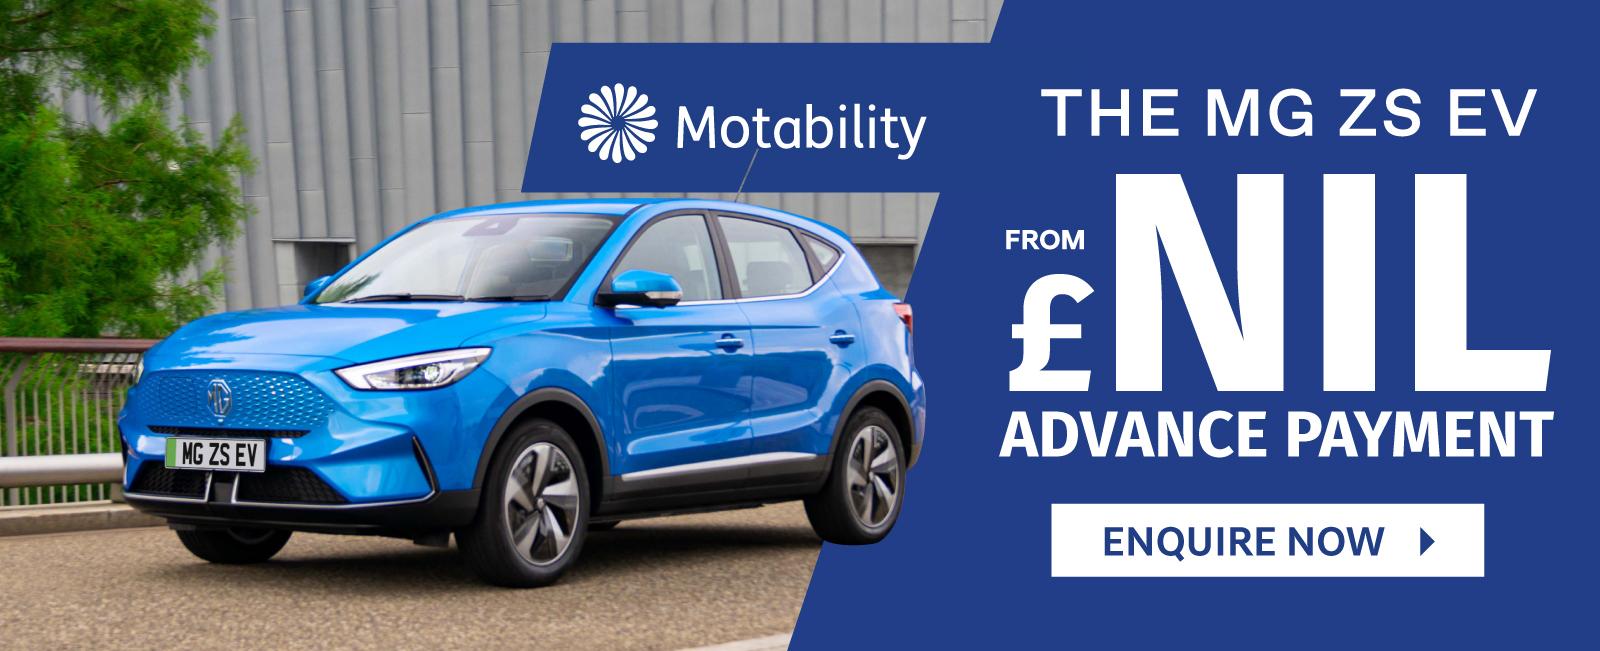 The MG ZS Electric on Motability Scheme from £NIL Advance Payment